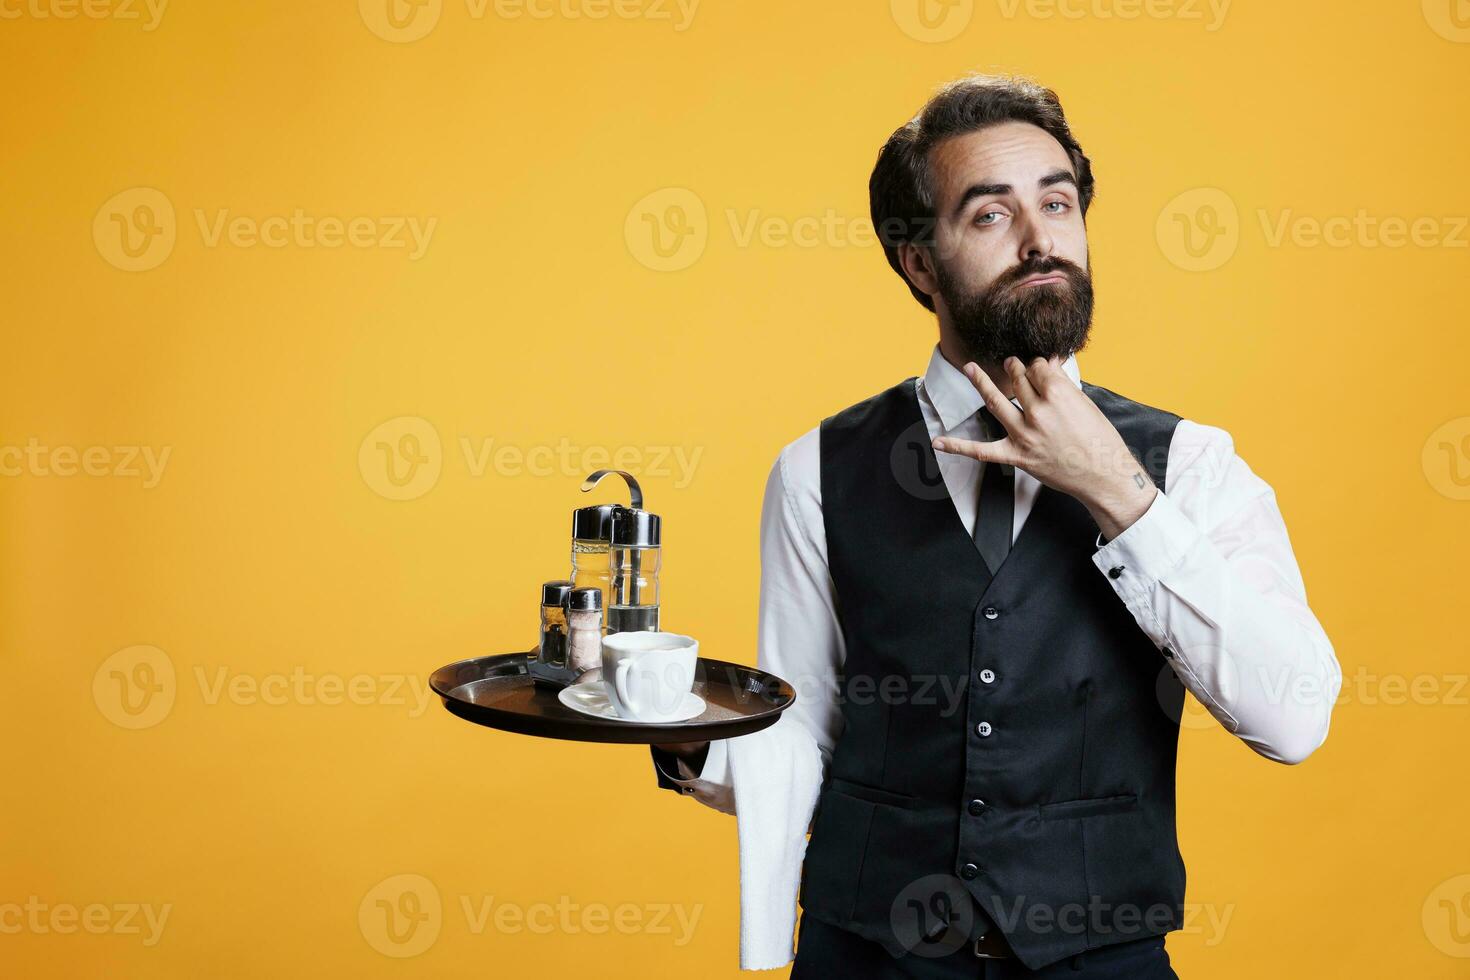 Stylish waiter posing with food tray against yellow background, preparing to serve coffee cup or meal. Confident elegant restaurant employee in front of camera, feeling determined. photo